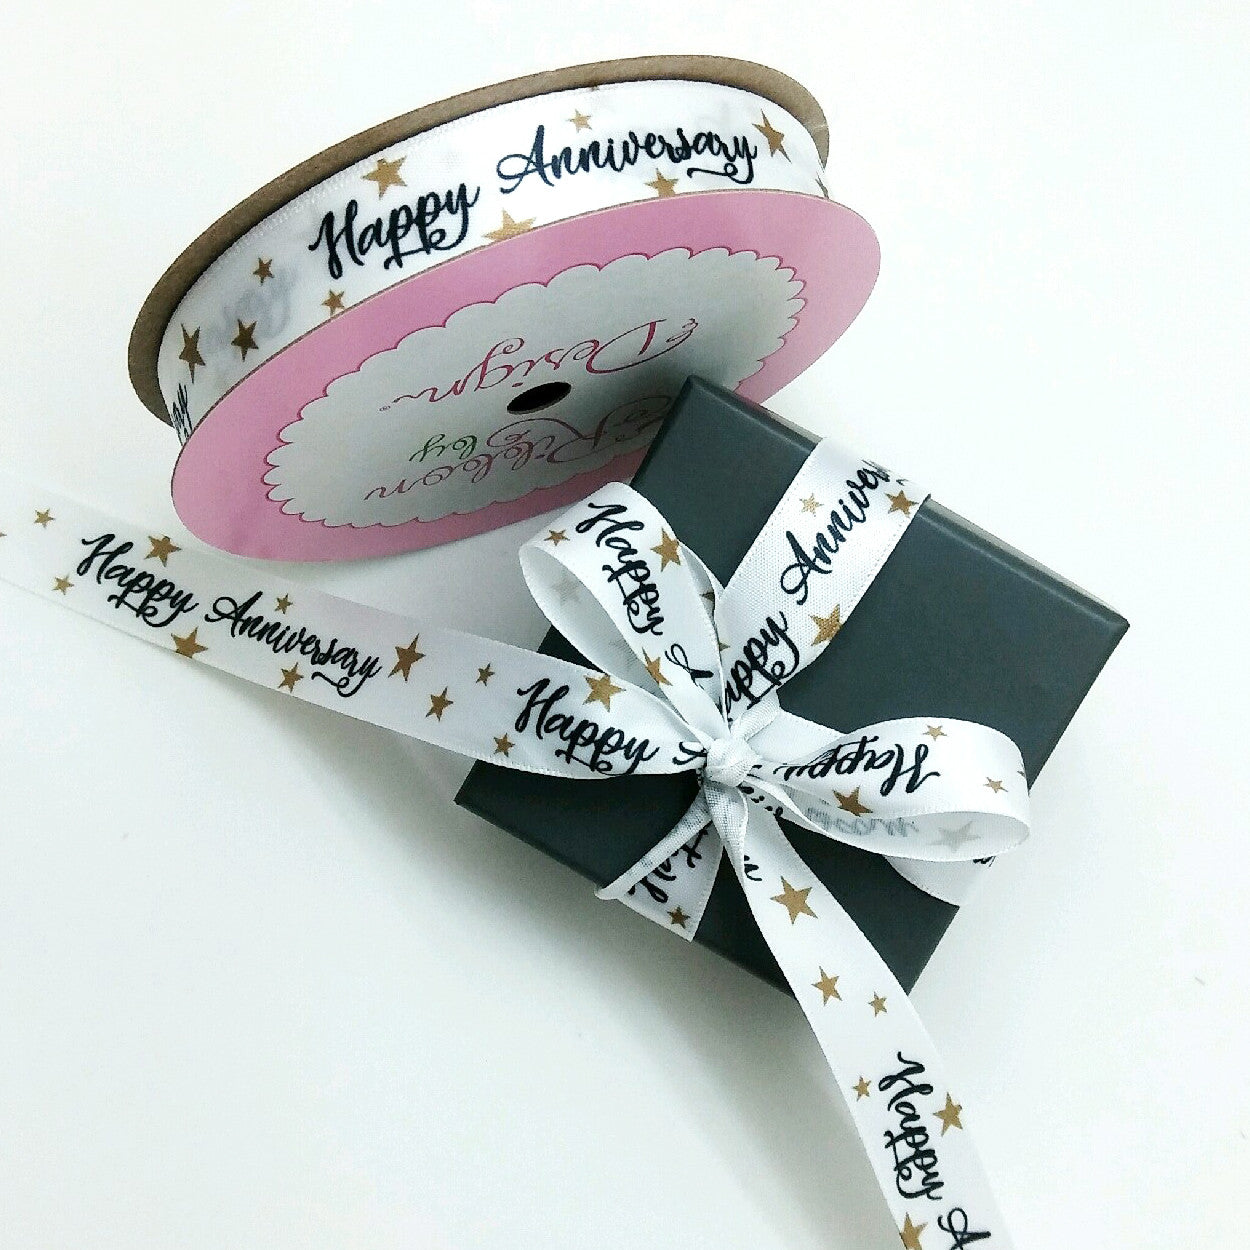 Happy Anniversary in black with gold stars on white single face satin makes this anniversary gift extra special!